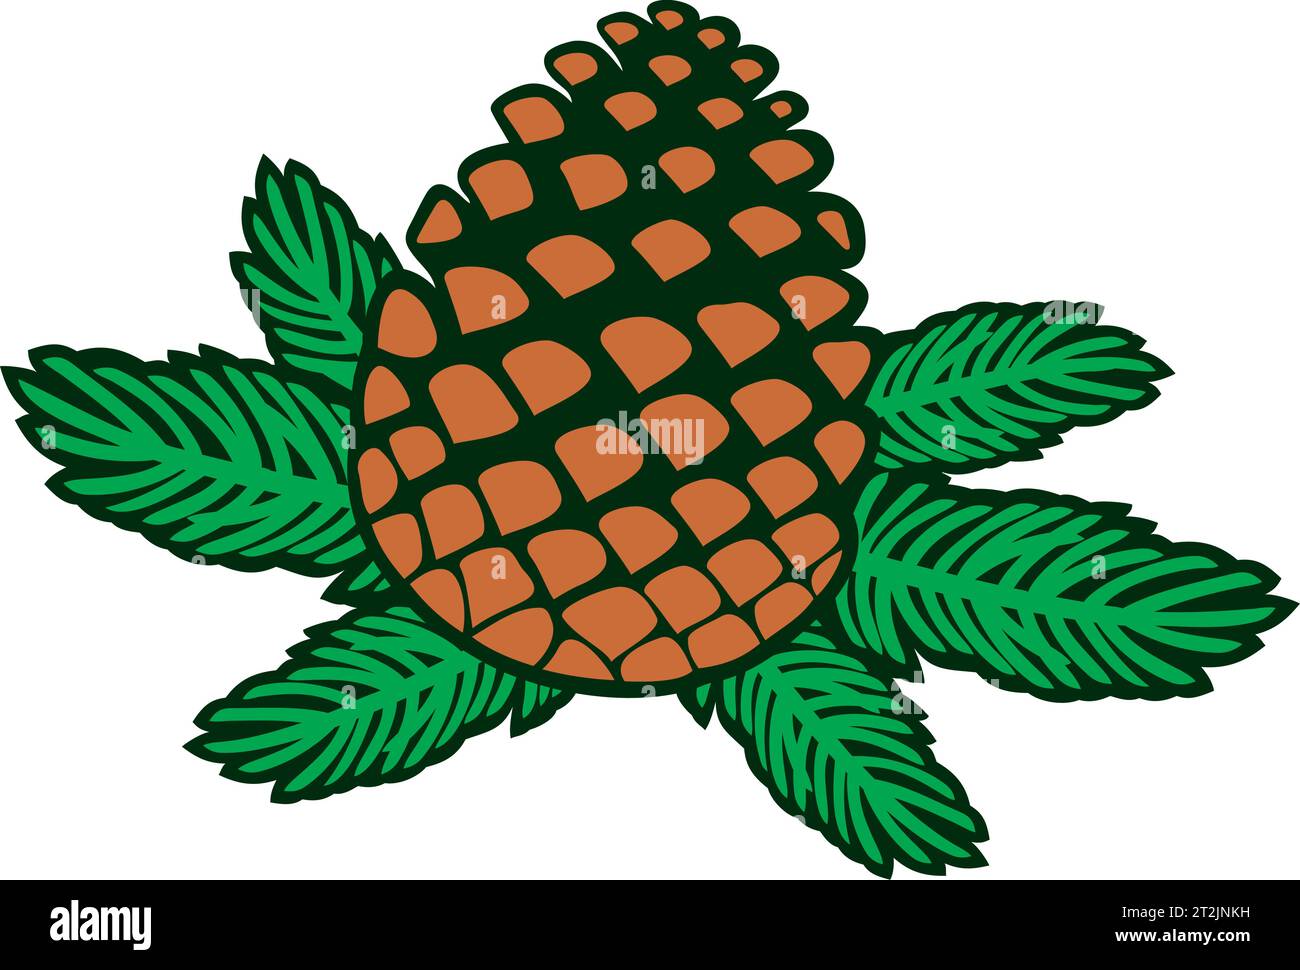 Pine cone and branch vector illustration Stock Vector